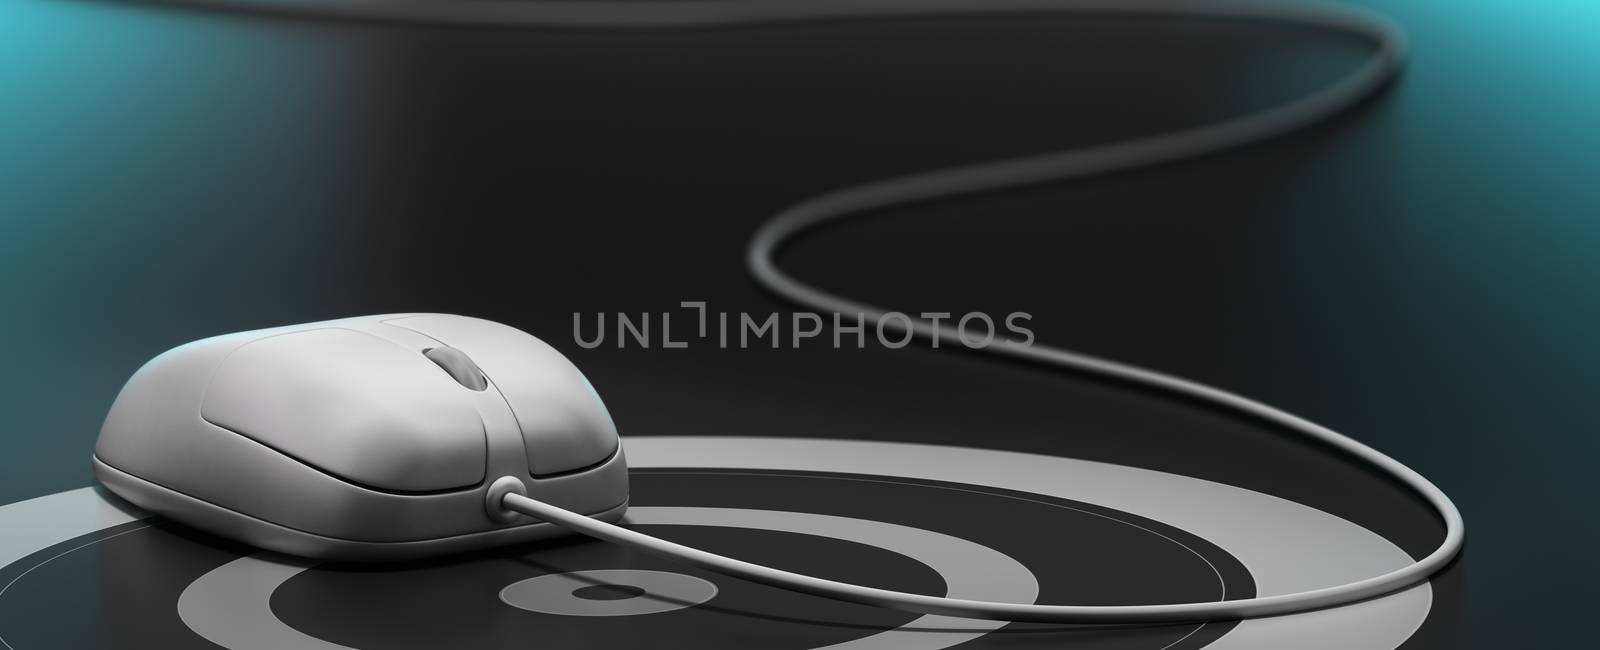 White mouse over a target with wire, black background, blue reflection and blur effect